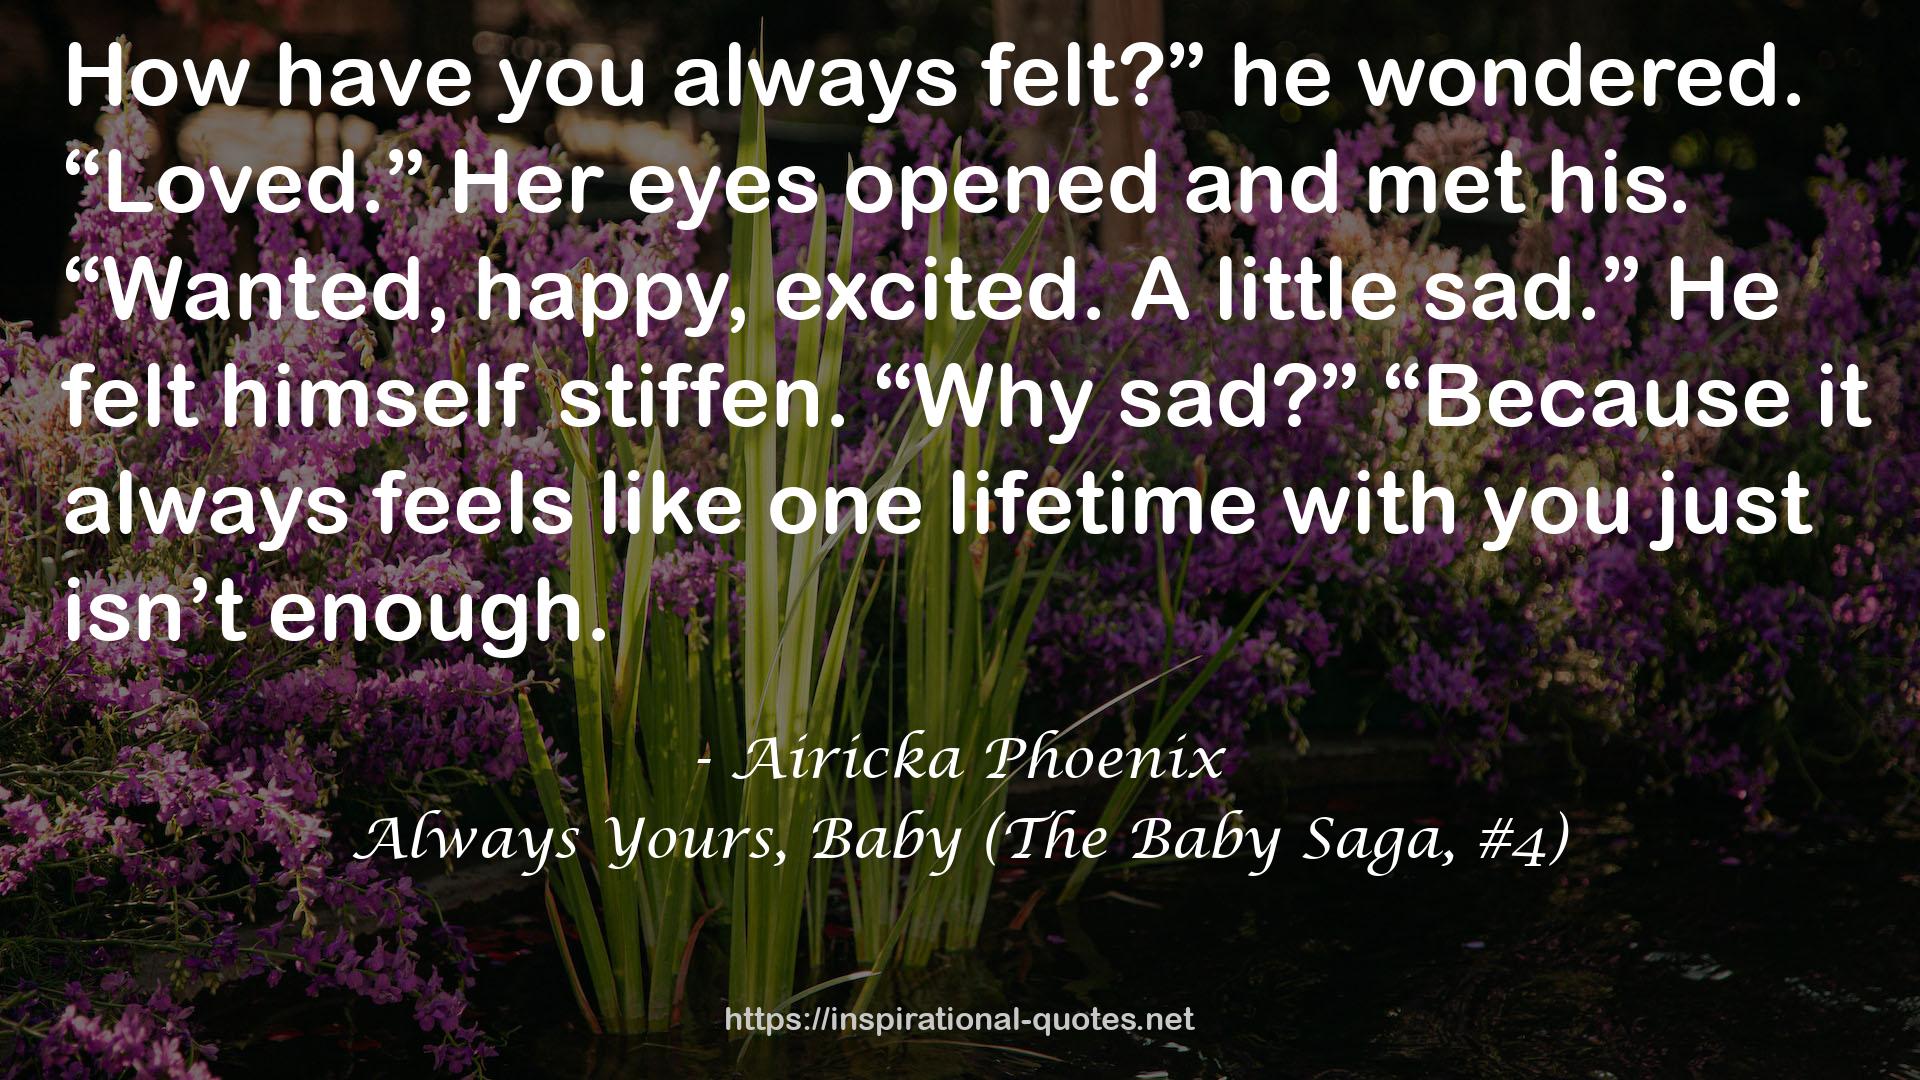 Always Yours, Baby (The Baby Saga, #4) QUOTES